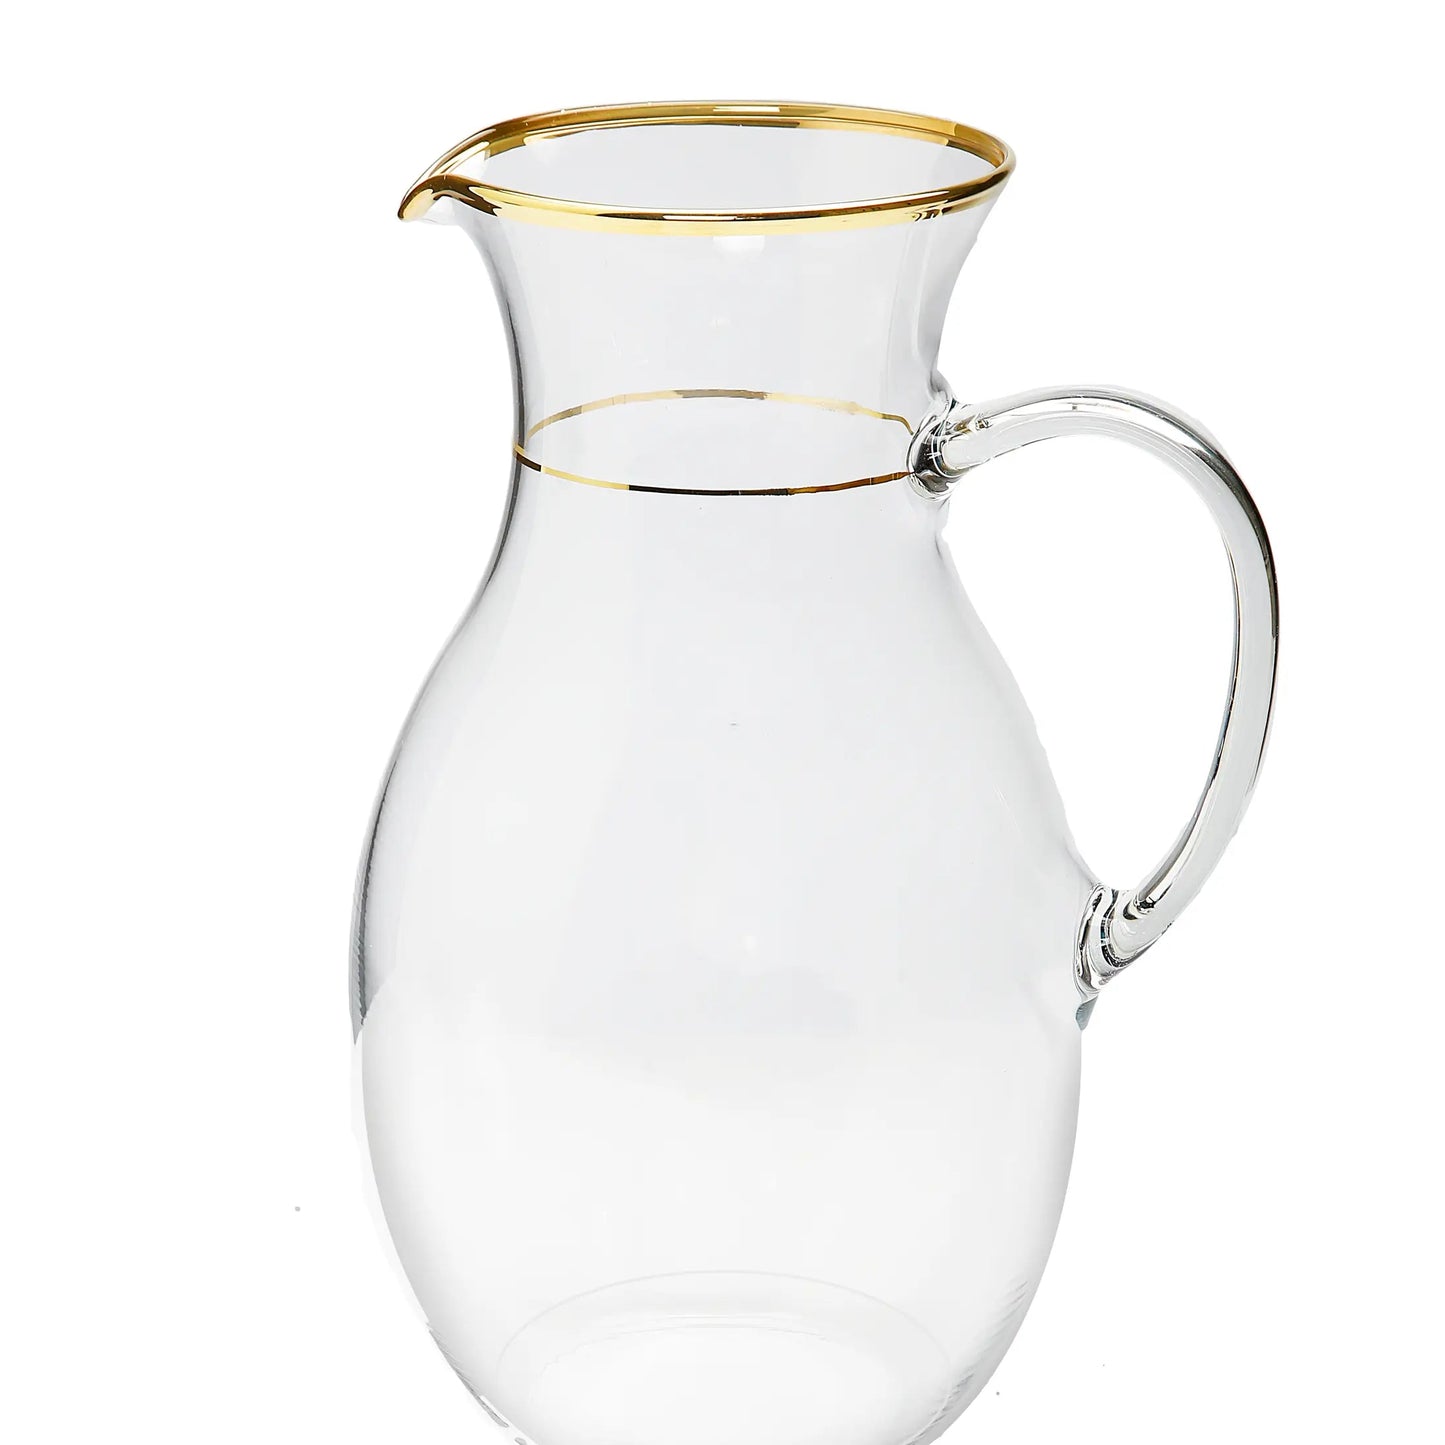 Clear Pitcher with Gold Trim Pitcher High Class Touch - Home Decor 